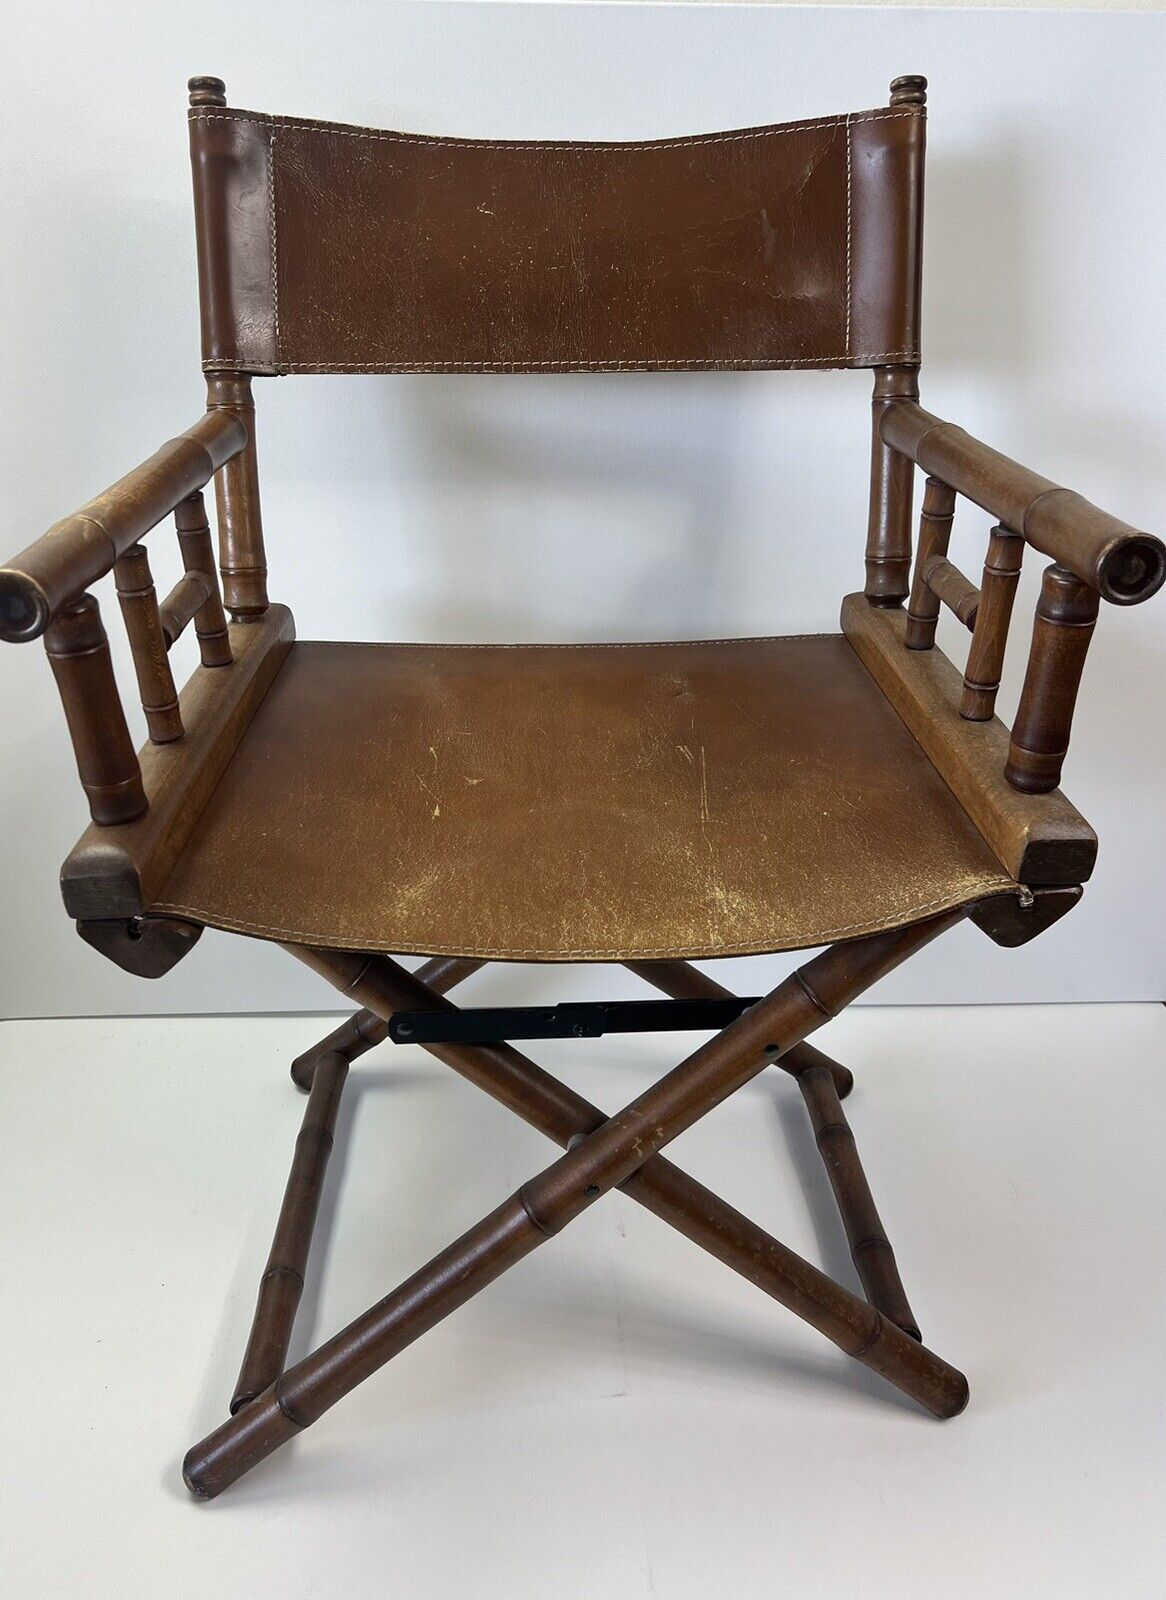 Vintage Mid Century Safari Sling Chair Leather Seat & Back Great Condition